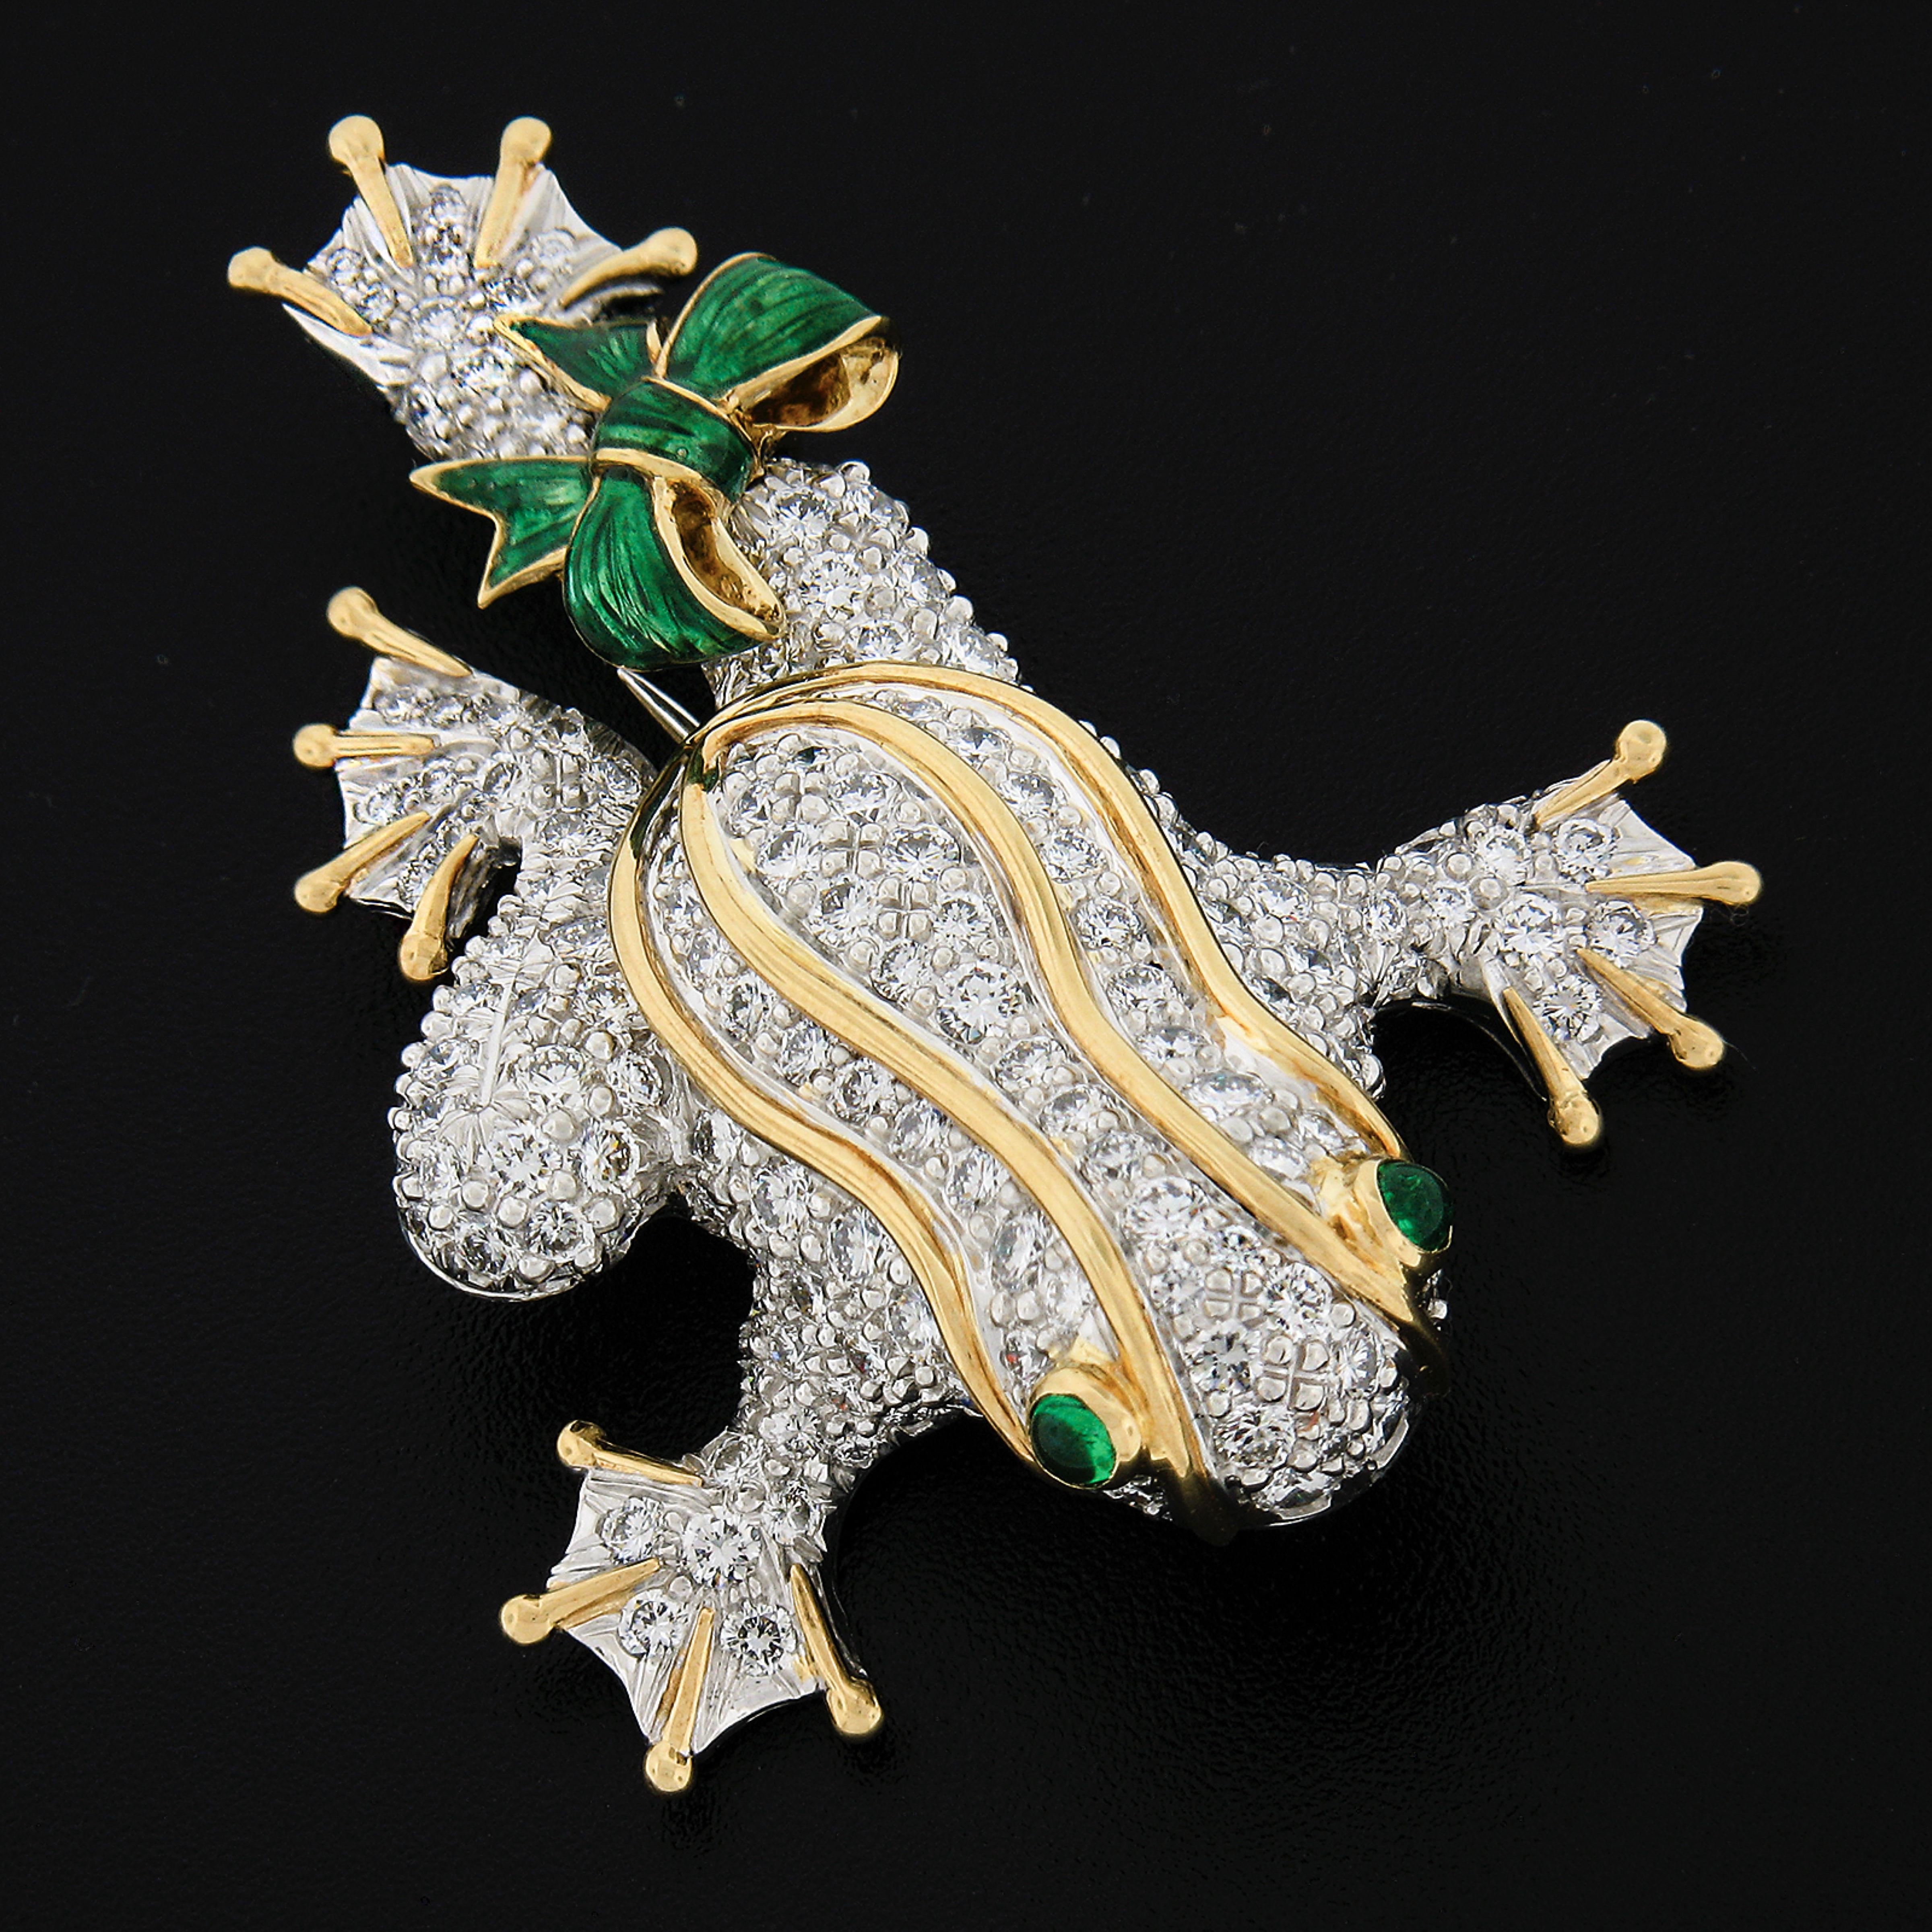 This breathtaking statement brooch by Tiffany & Co. features a large frog design crafted in solid platinum with 18k yellow gold accents throughout. The frog is completely drenched with the finest quality round brilliant cut diamonds that show